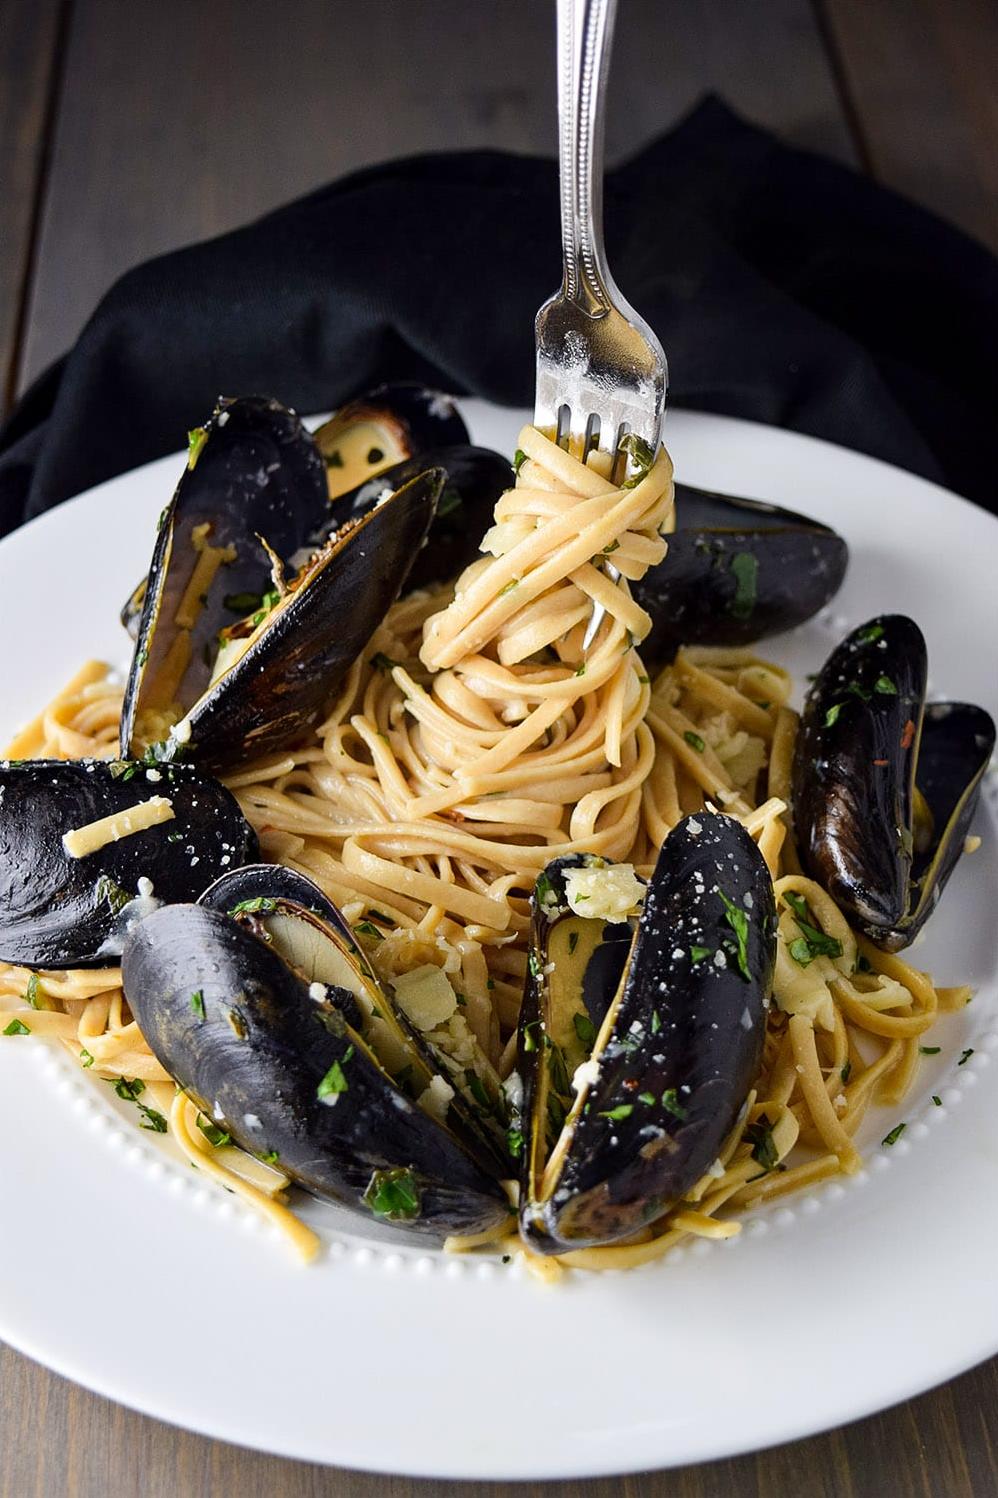  Spaghetti swimming in a flavorful pool of white wine and mussel sauce.